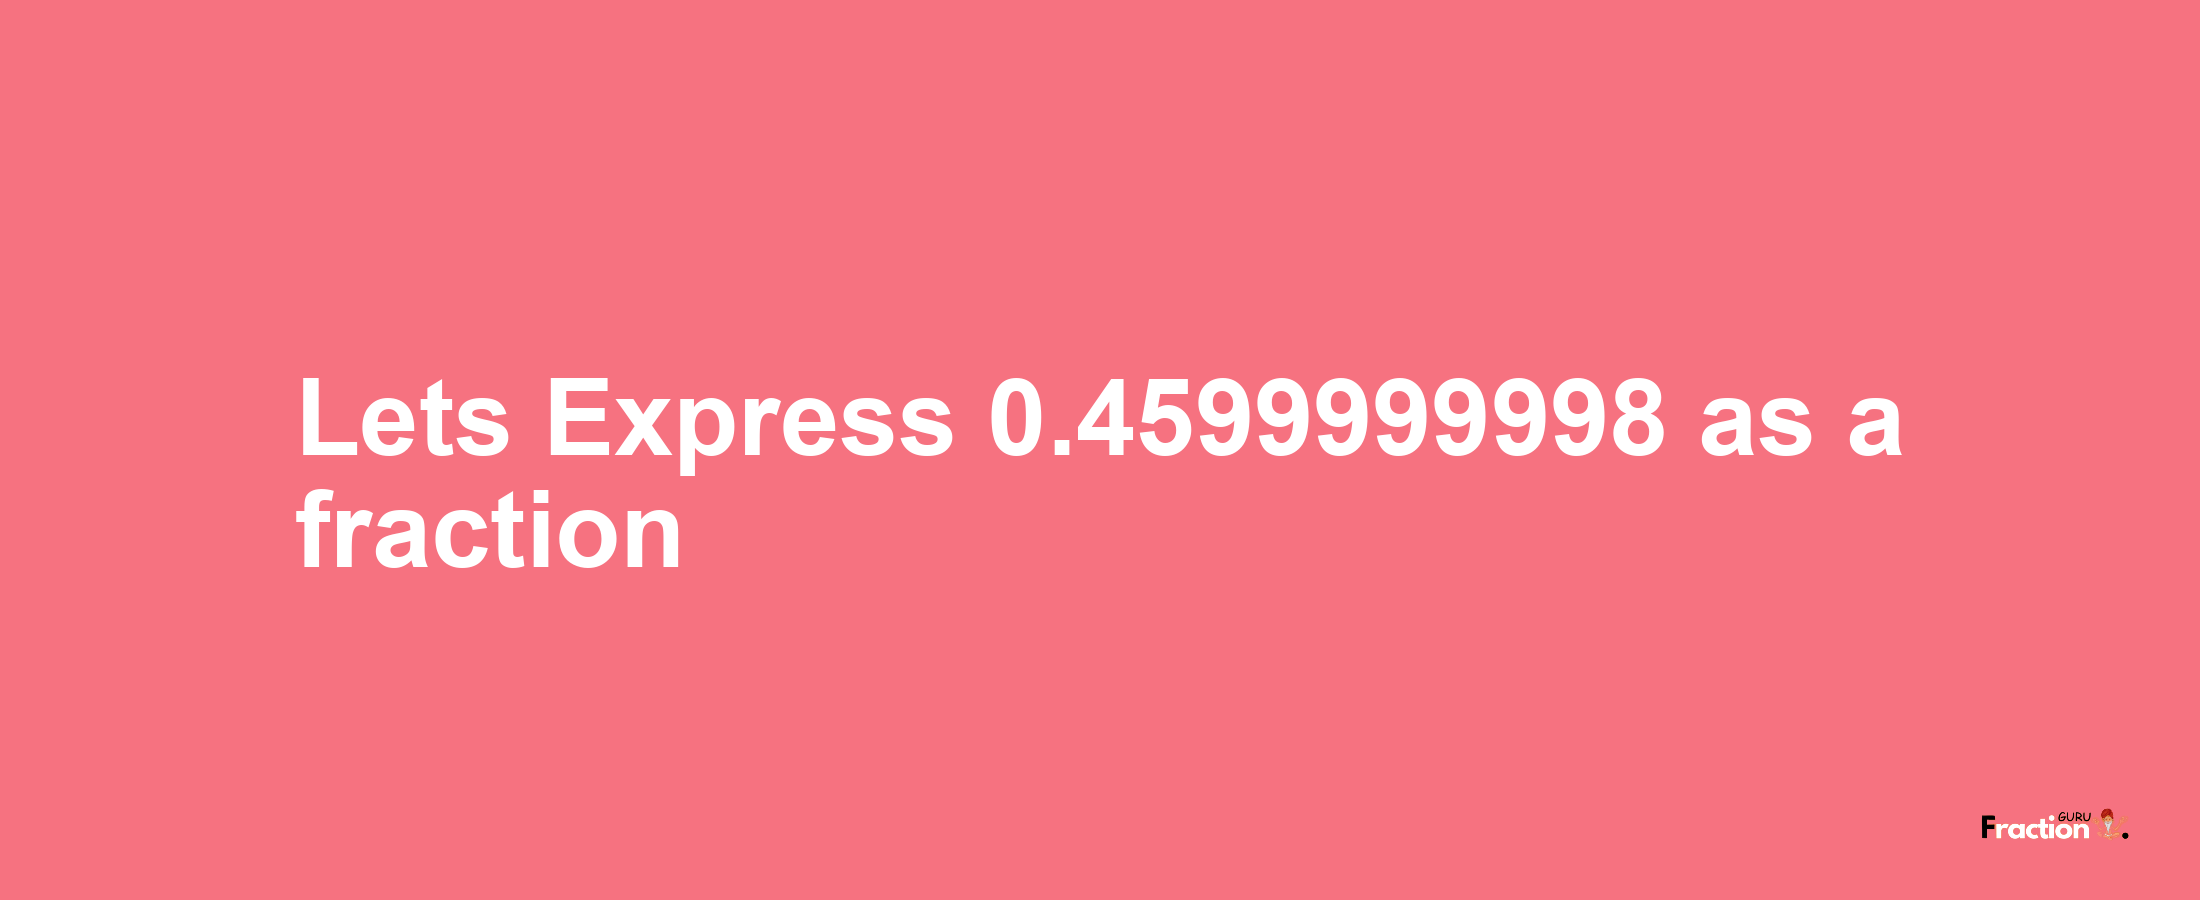 Lets Express 0.4599999998 as afraction